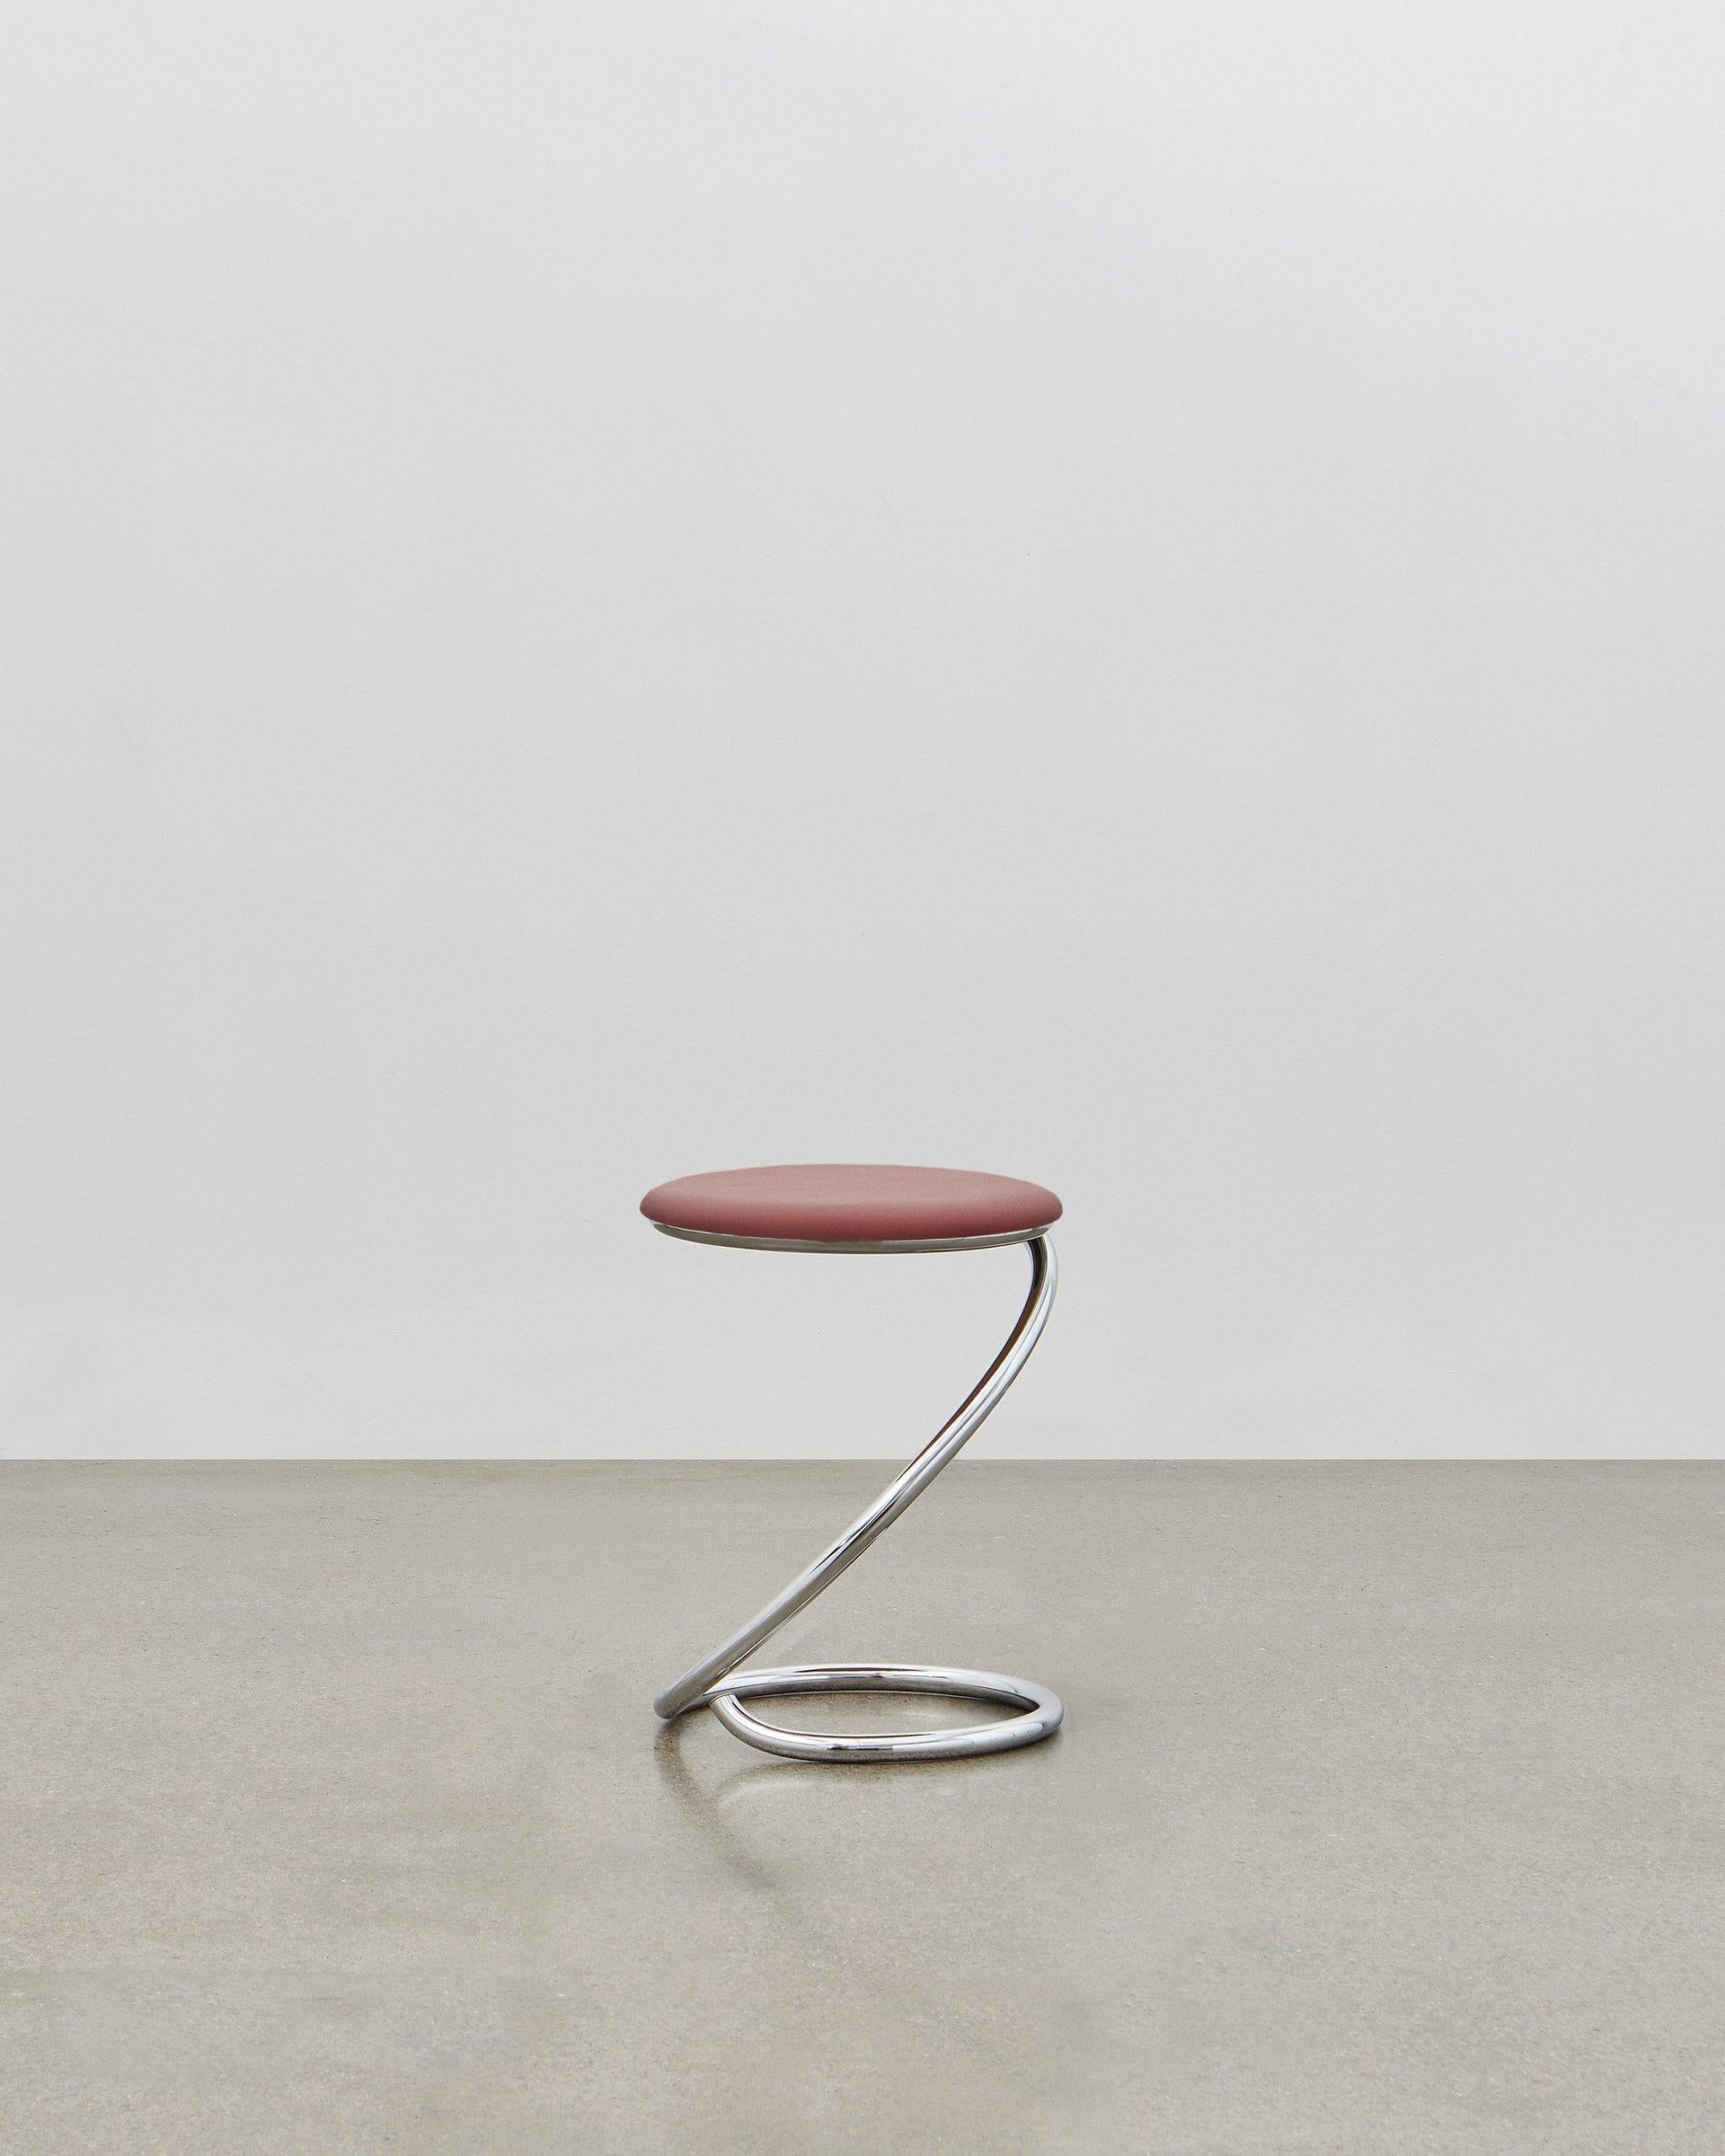 The PH snake stool is completely true to the original design and the use of chromed steel tubes, however updated for the 21st century to be available with wood seating in five colorways to coordinate with the ever-popular Poul Henningsen lighting